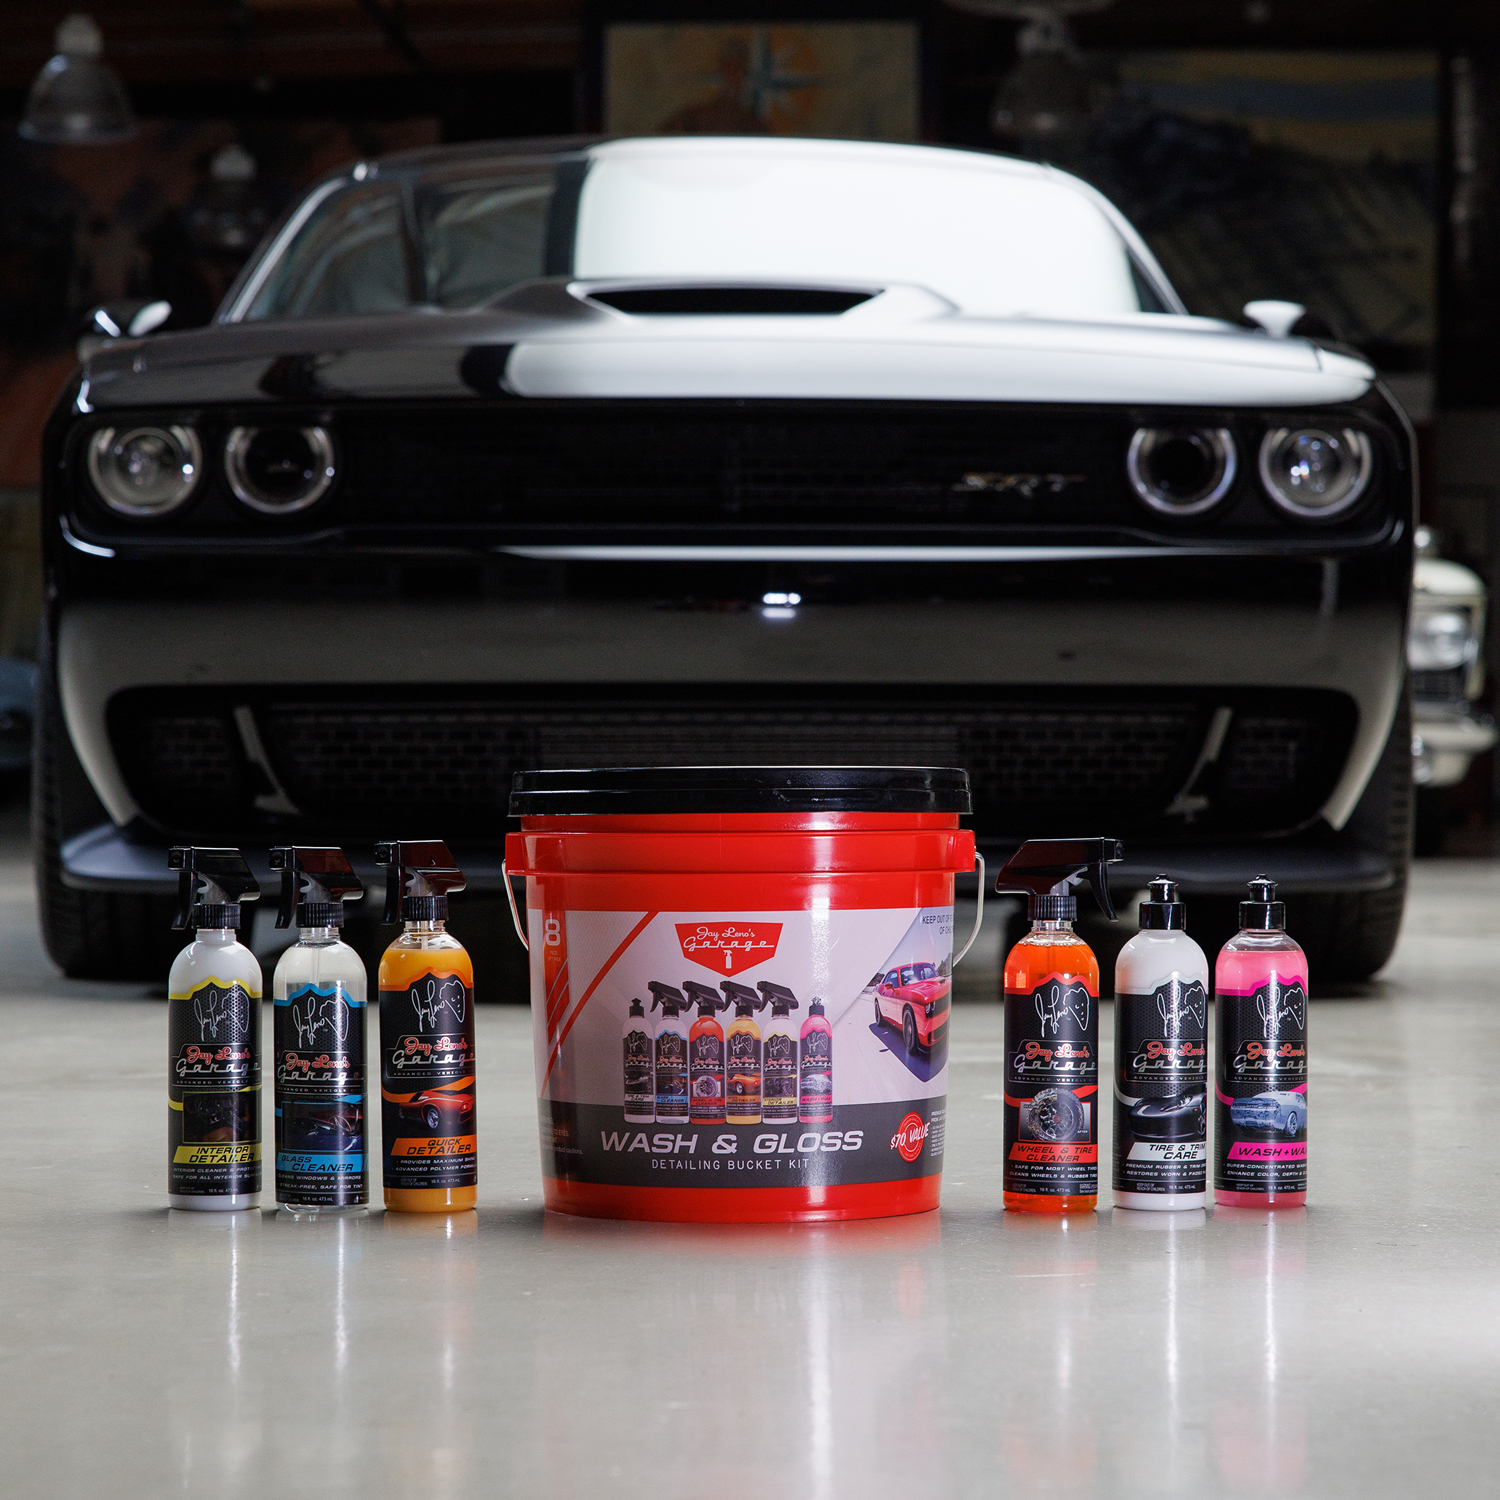 Jay Leno's Garage Wash & Gloss 8-Piece Detailing Bucket Kit - Wash, Clean & Protect - image 2 of 26